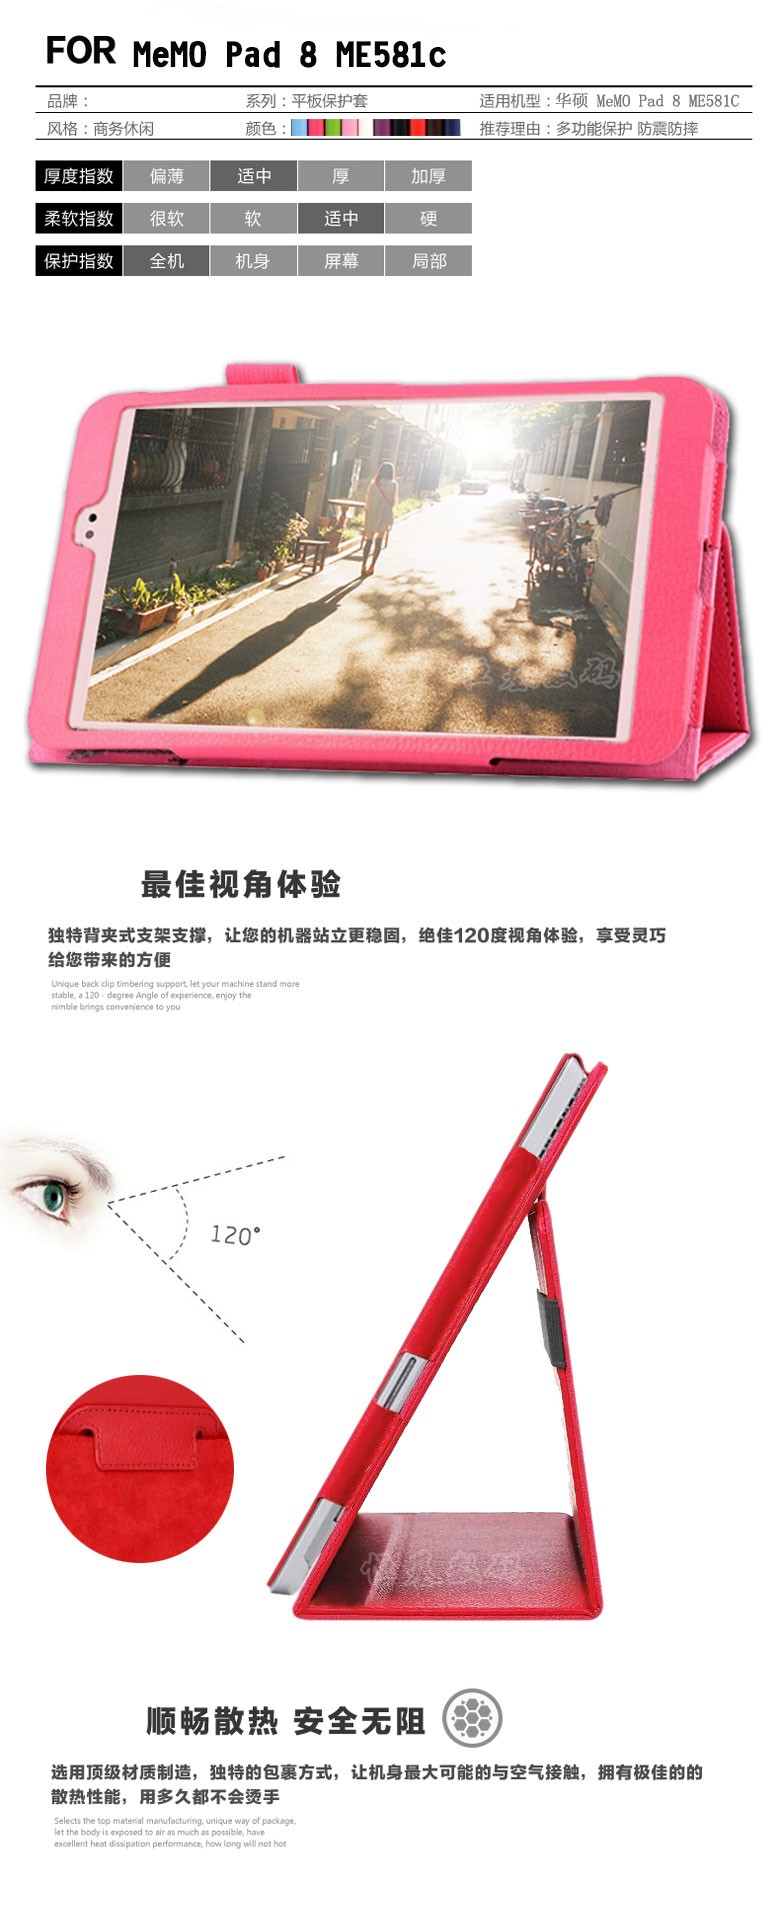 cover for ME 581 tablet (1)